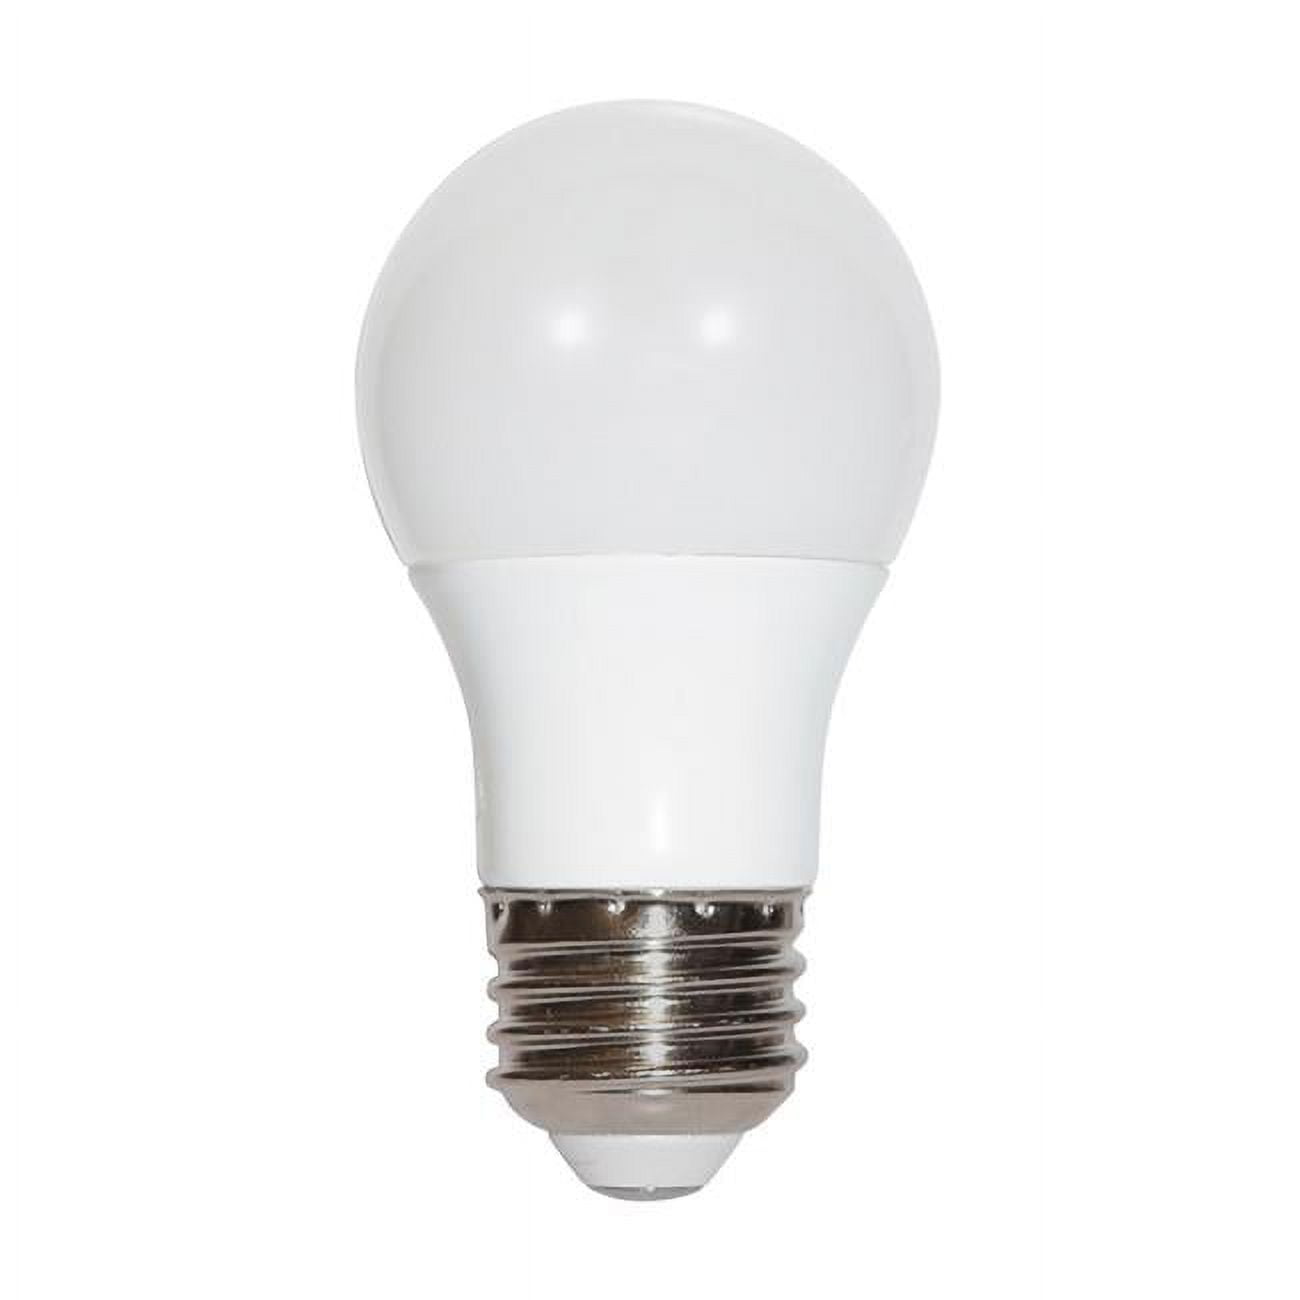 Picture of Satco 3862927 5.5W A15 LED Bulb, 450 Lumens - Warm White